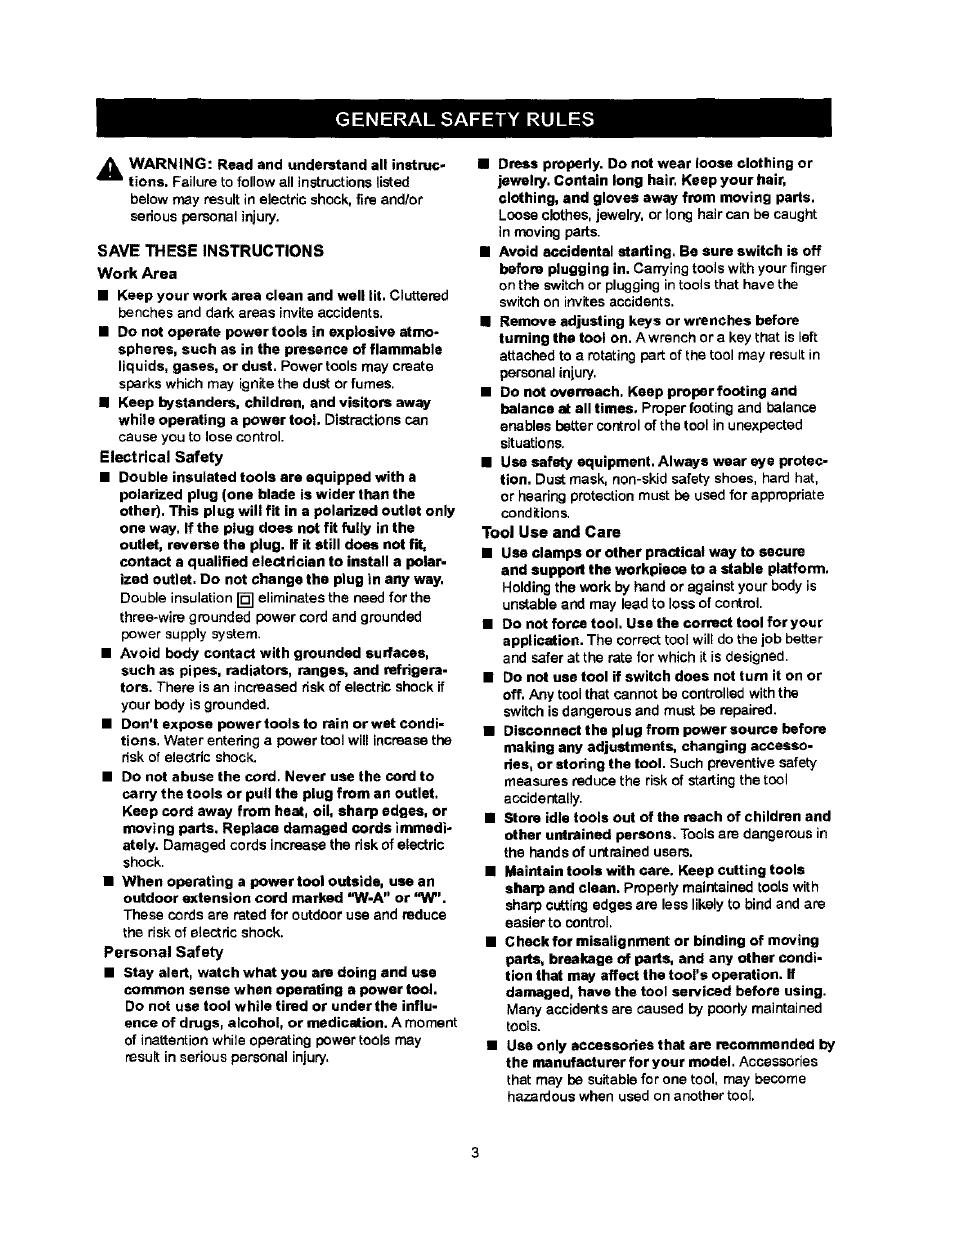 General safety rules, Tool use and care | Craftsman 315.115032 User Manual | Page 3 / 14